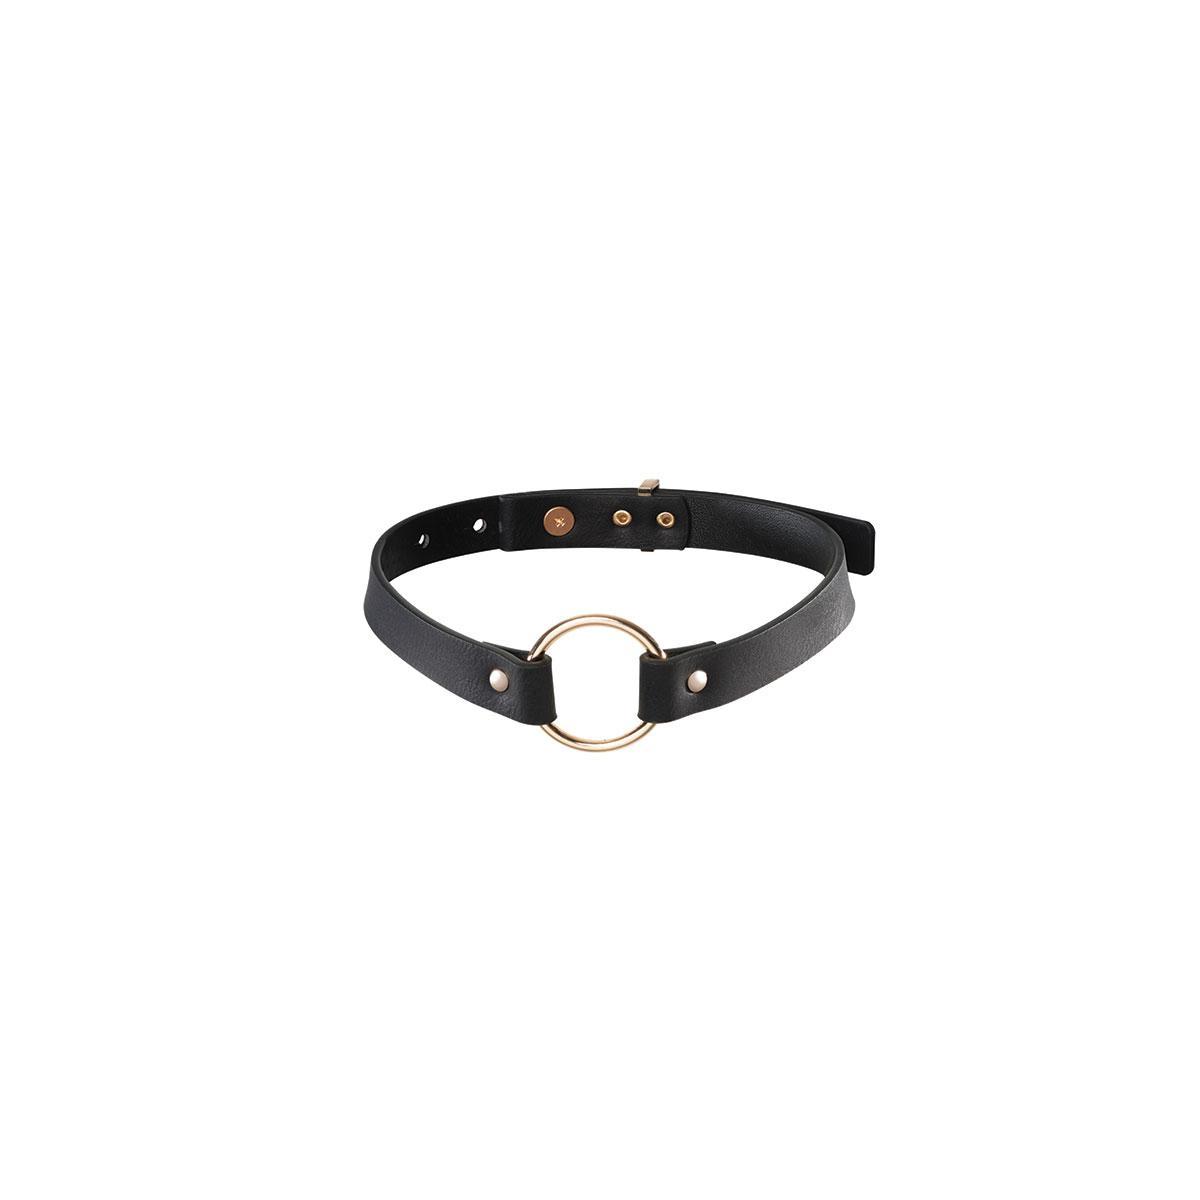 Bijoux Indiscrets Maze Single Ring Choker - Buy At Luxury Toy X - Free 3-Day Shipping